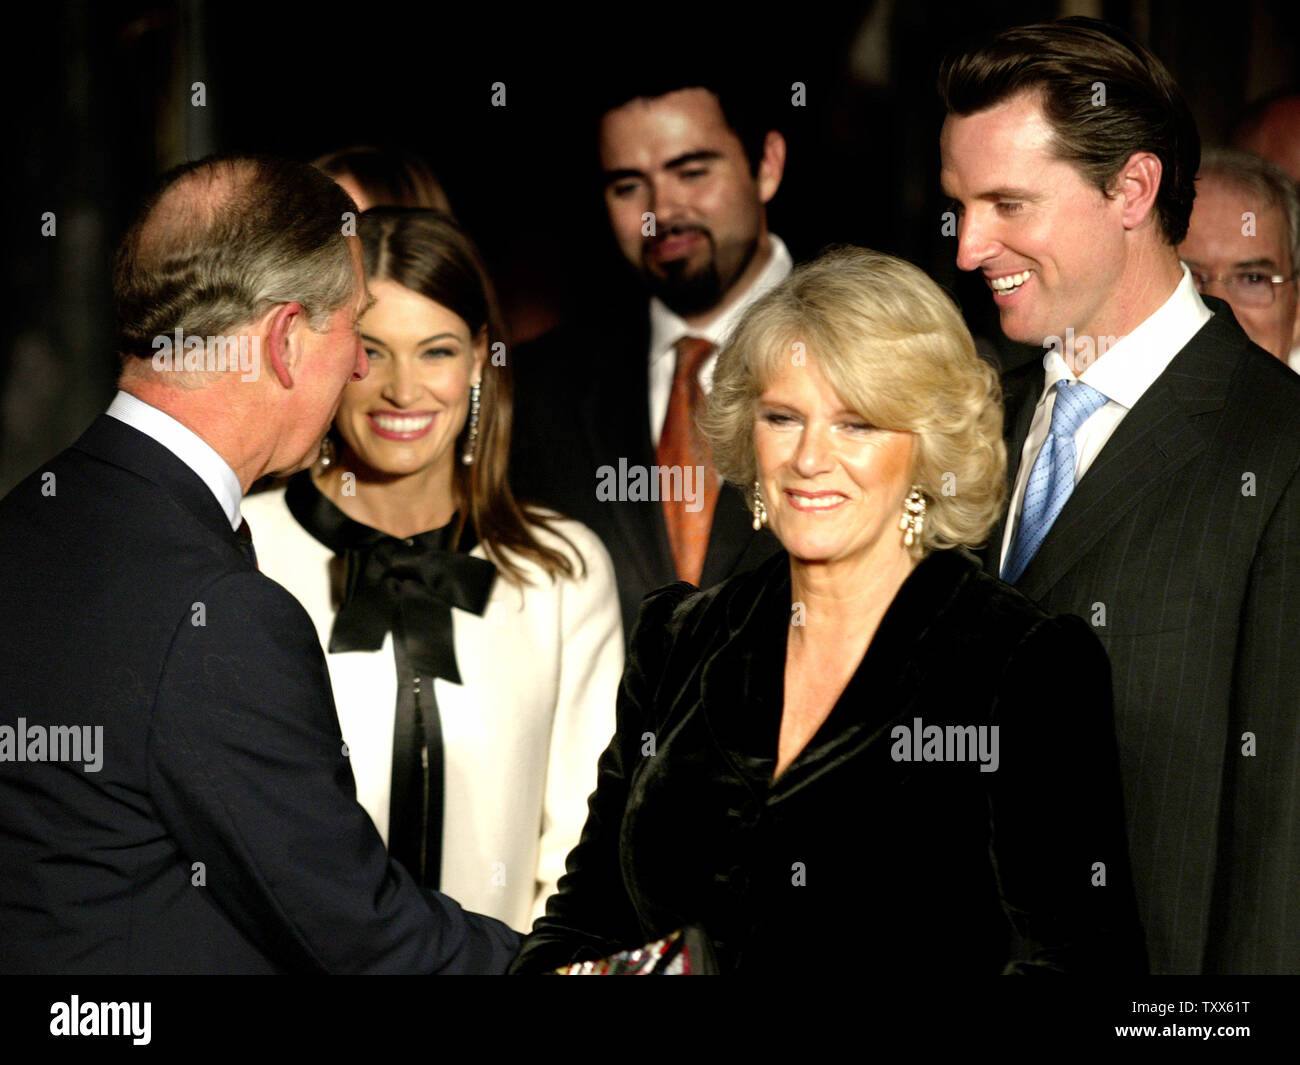 Prince Charles, The Prince of Wales (L), and his wife Camilla, The Duchess of Cornwall (2nd R) talk with San Francisco Mayor Gavin Newsom (R) and his wife Kimberly (2nd L)after attending a performance of Beach Blanket Babylon at Club Fugazi in San Francisco  on November 6, 2005. (UPI Photo/Ken James) Stock Photo